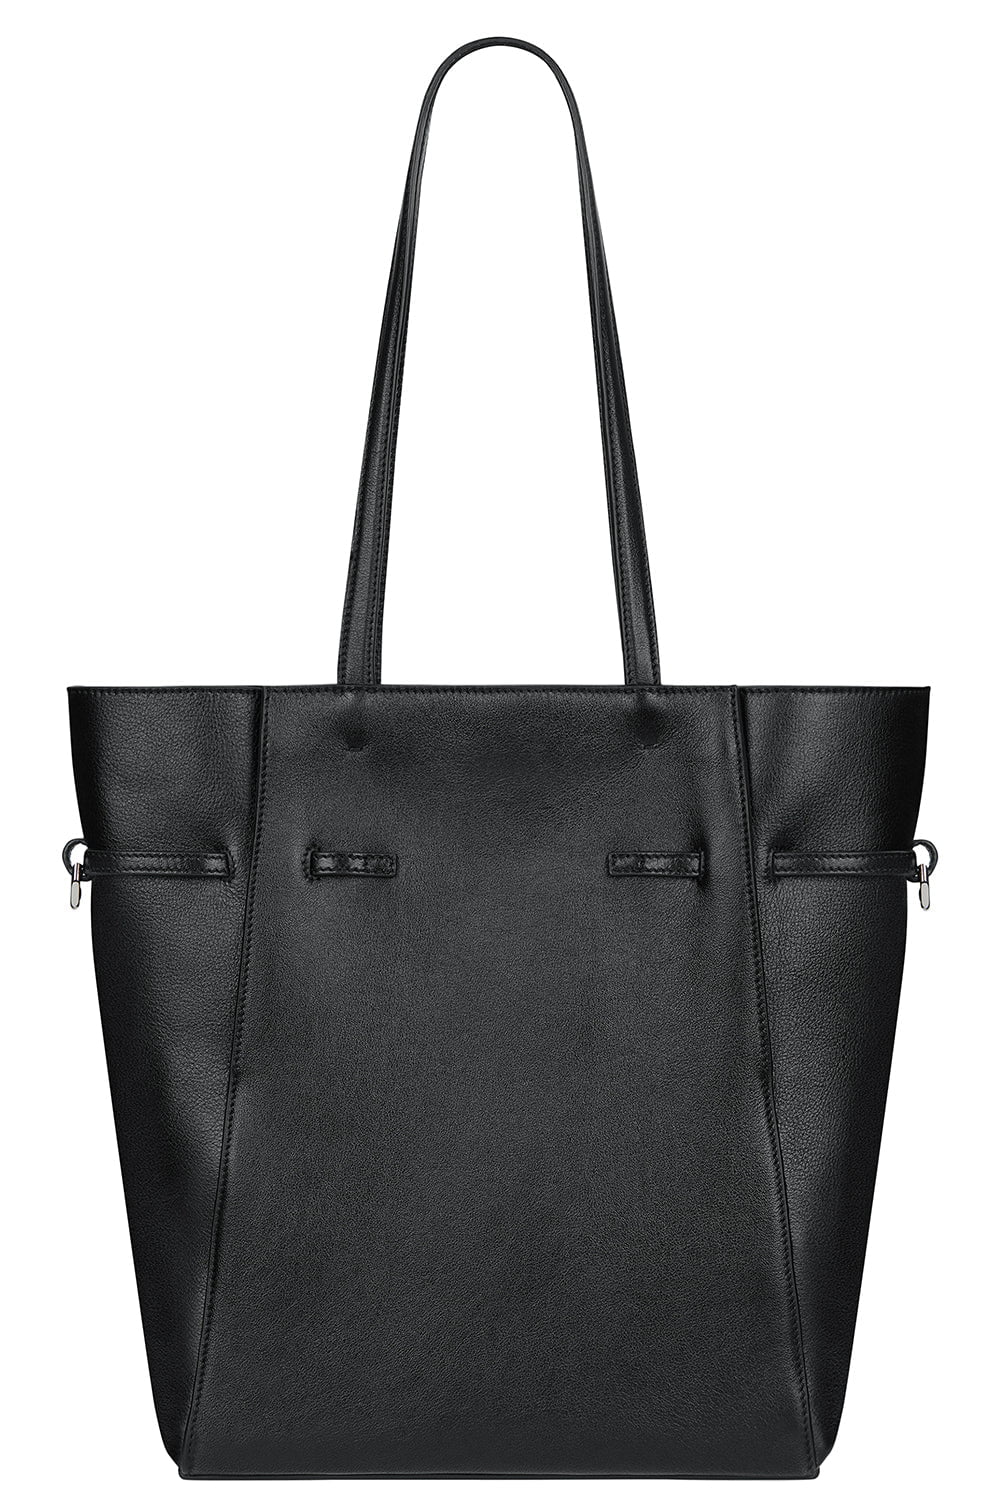 GIVENCHY-Voyou Small North South Tote-BLACK